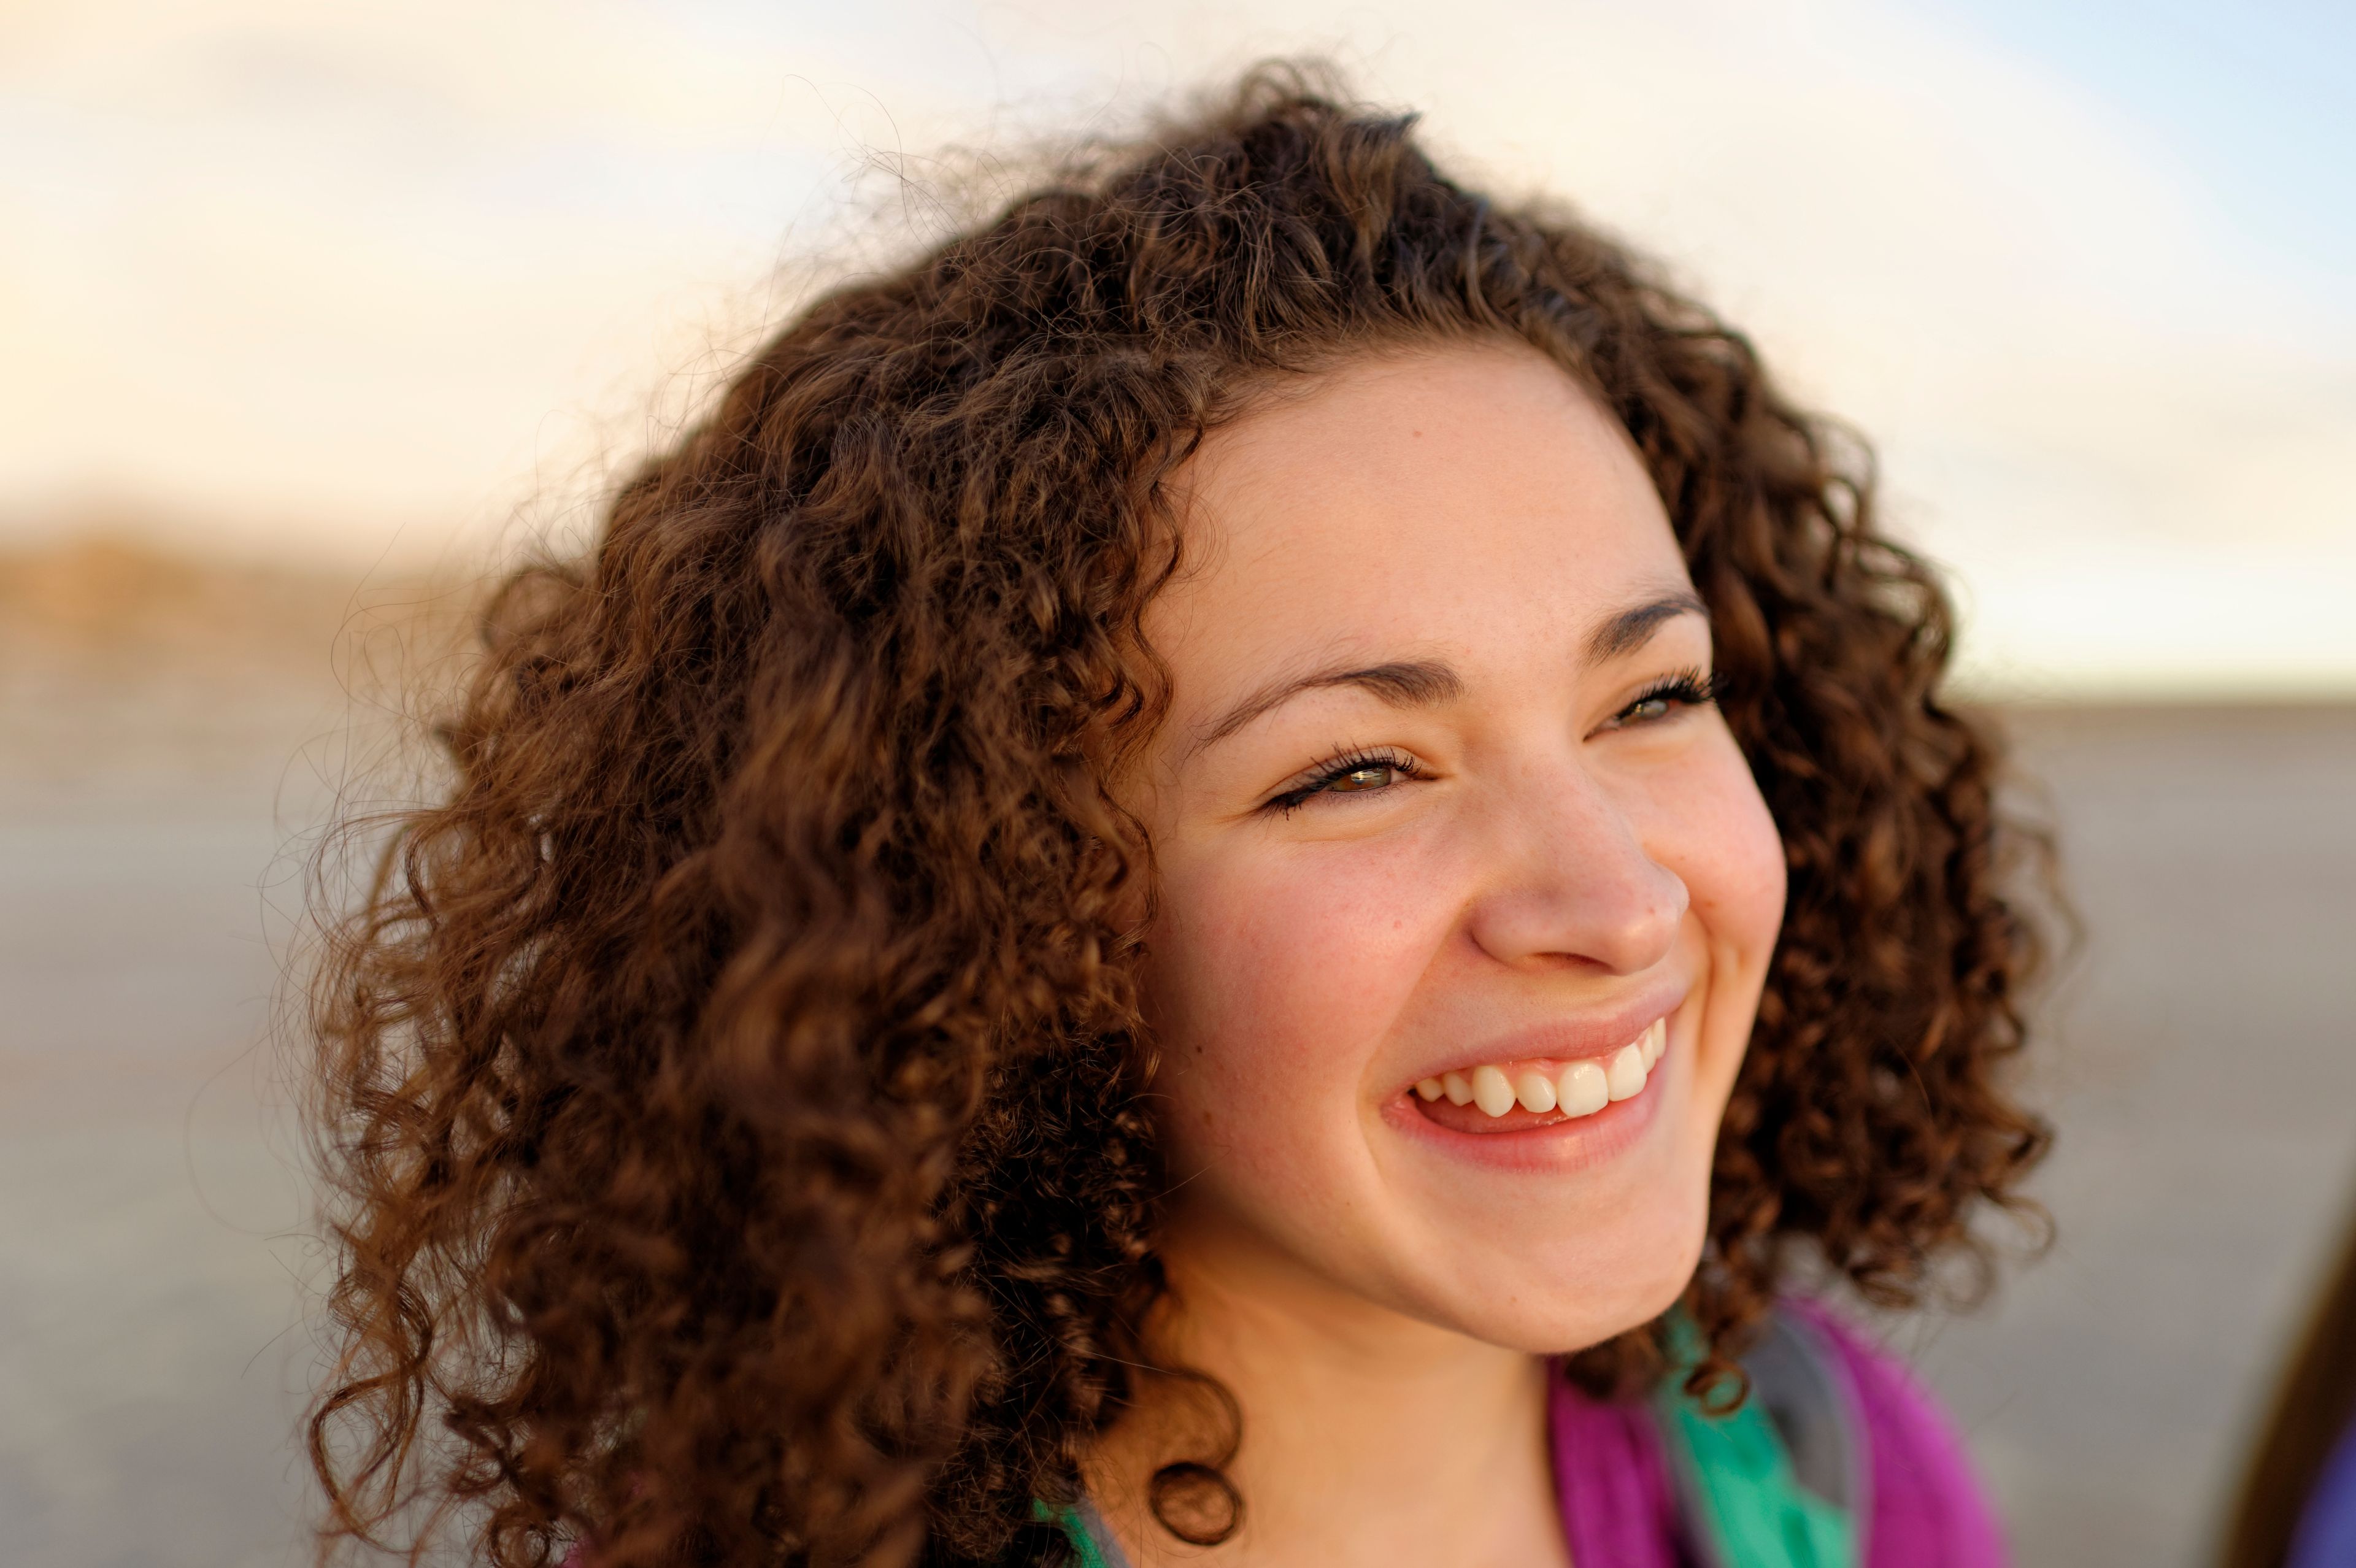 A portrait of a young woman with short curly hair, smiling.